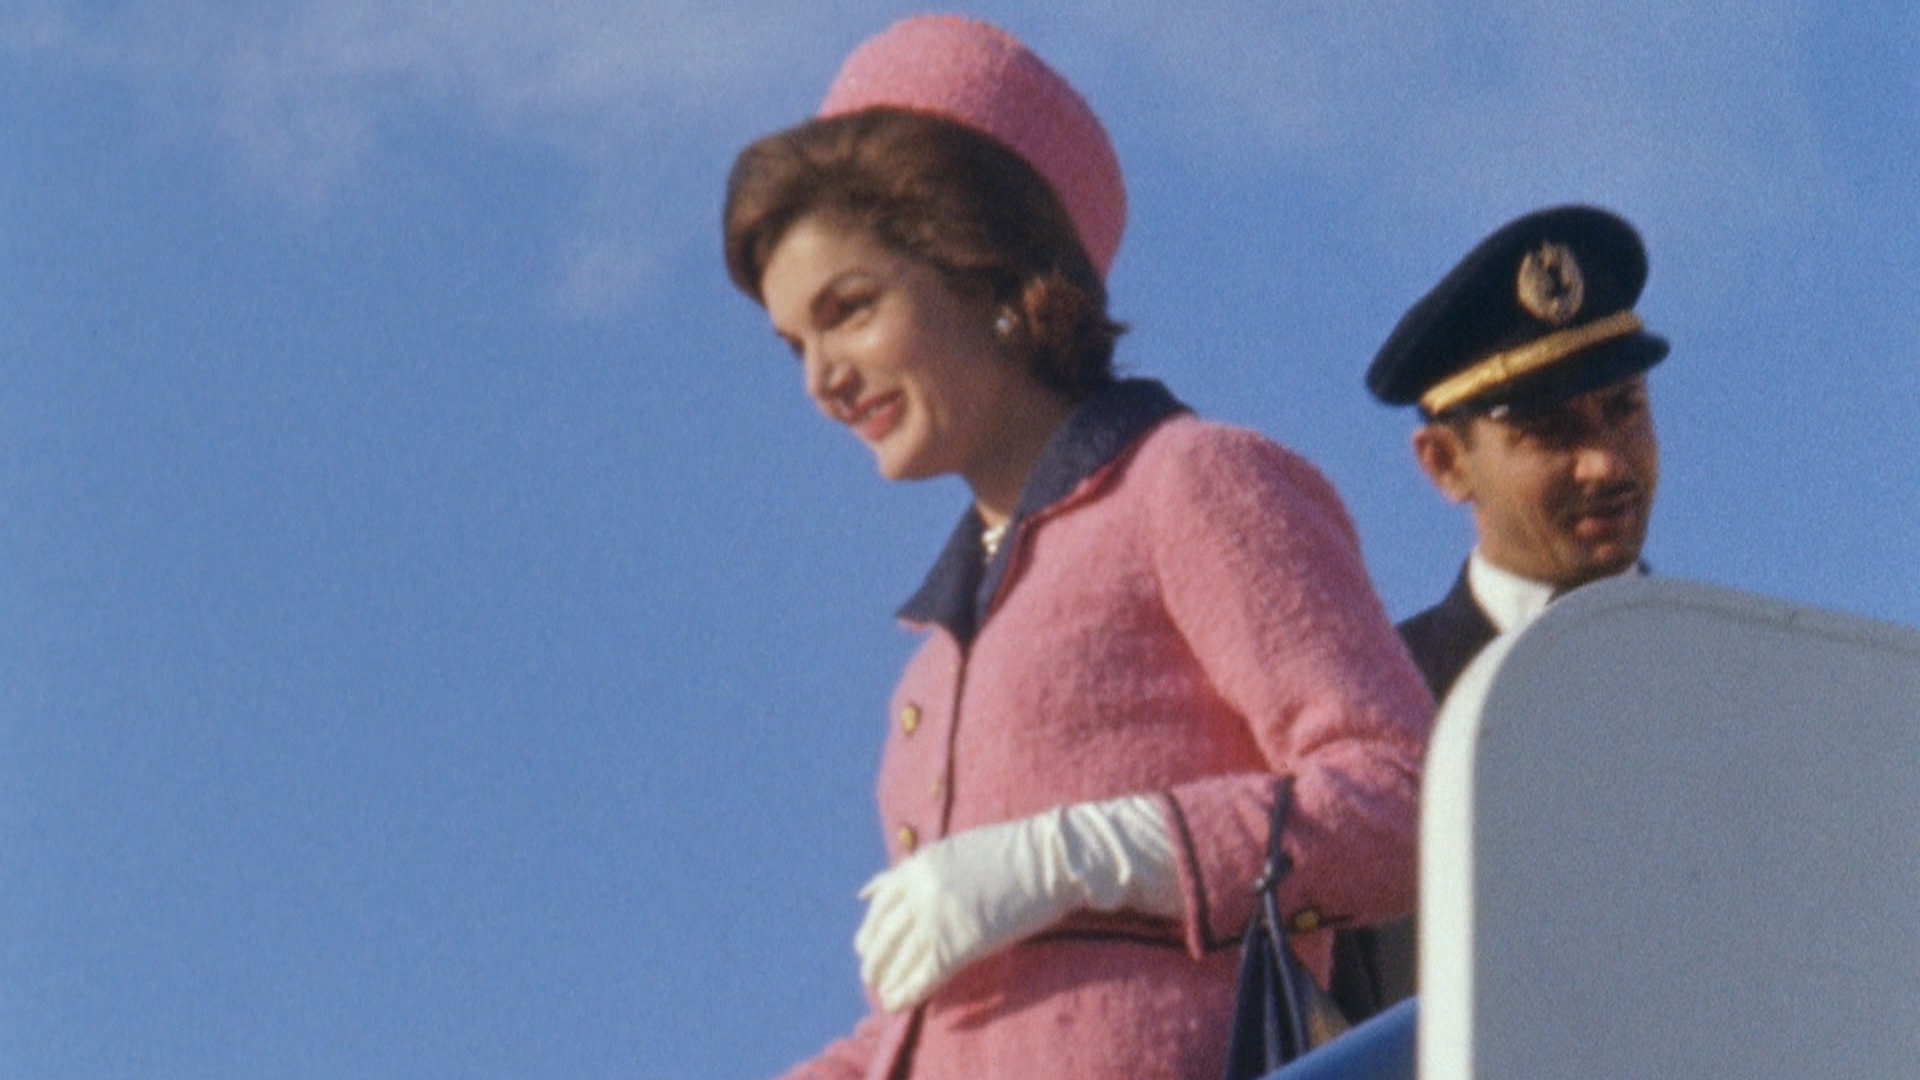 Jackie Kennedy's iconic pink suit: A piece of American history